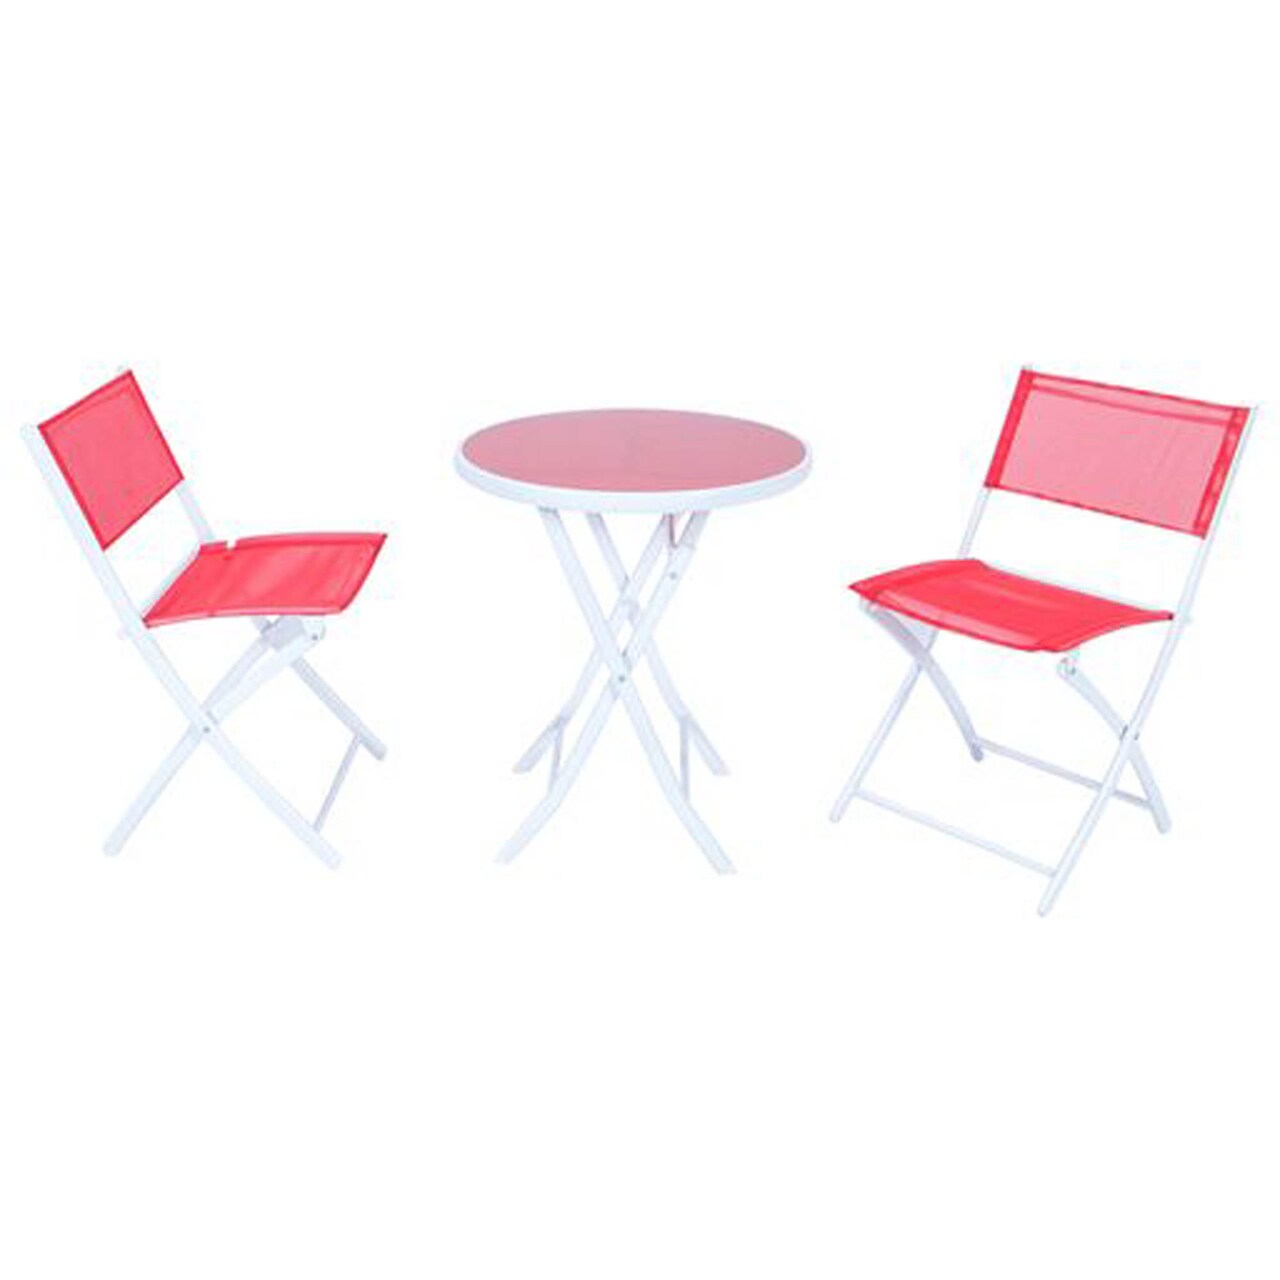 LeisureMod Outdoor Bistro Folding Table Chairs Set - Red